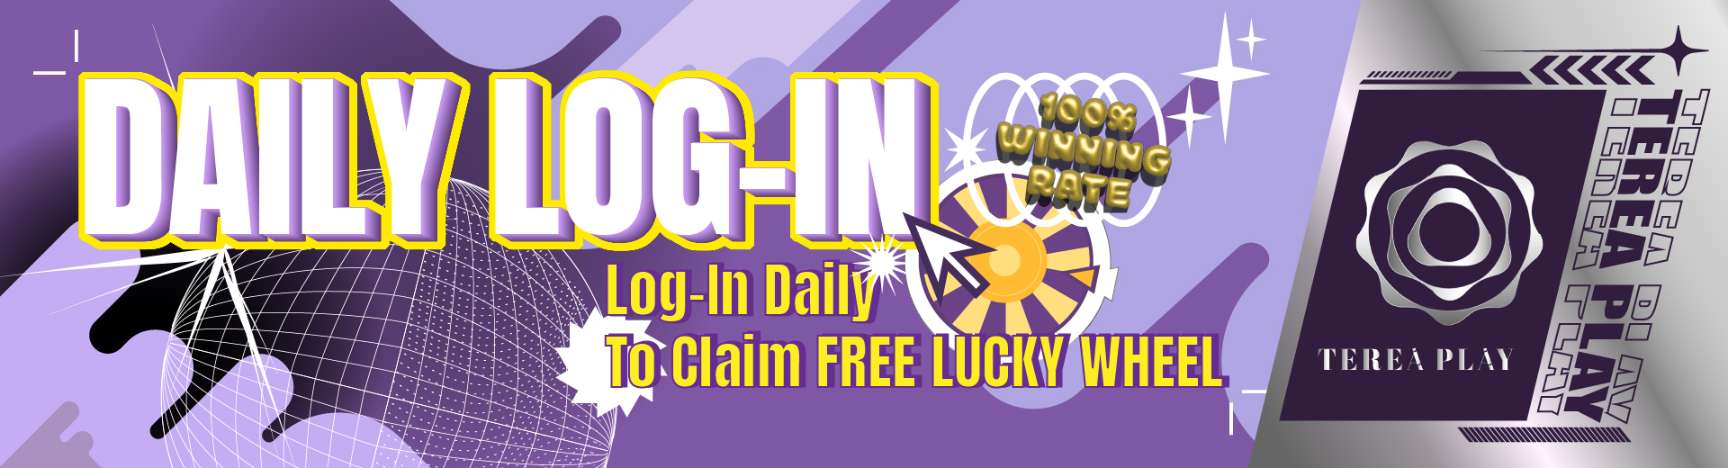 Daily-log-in_banner